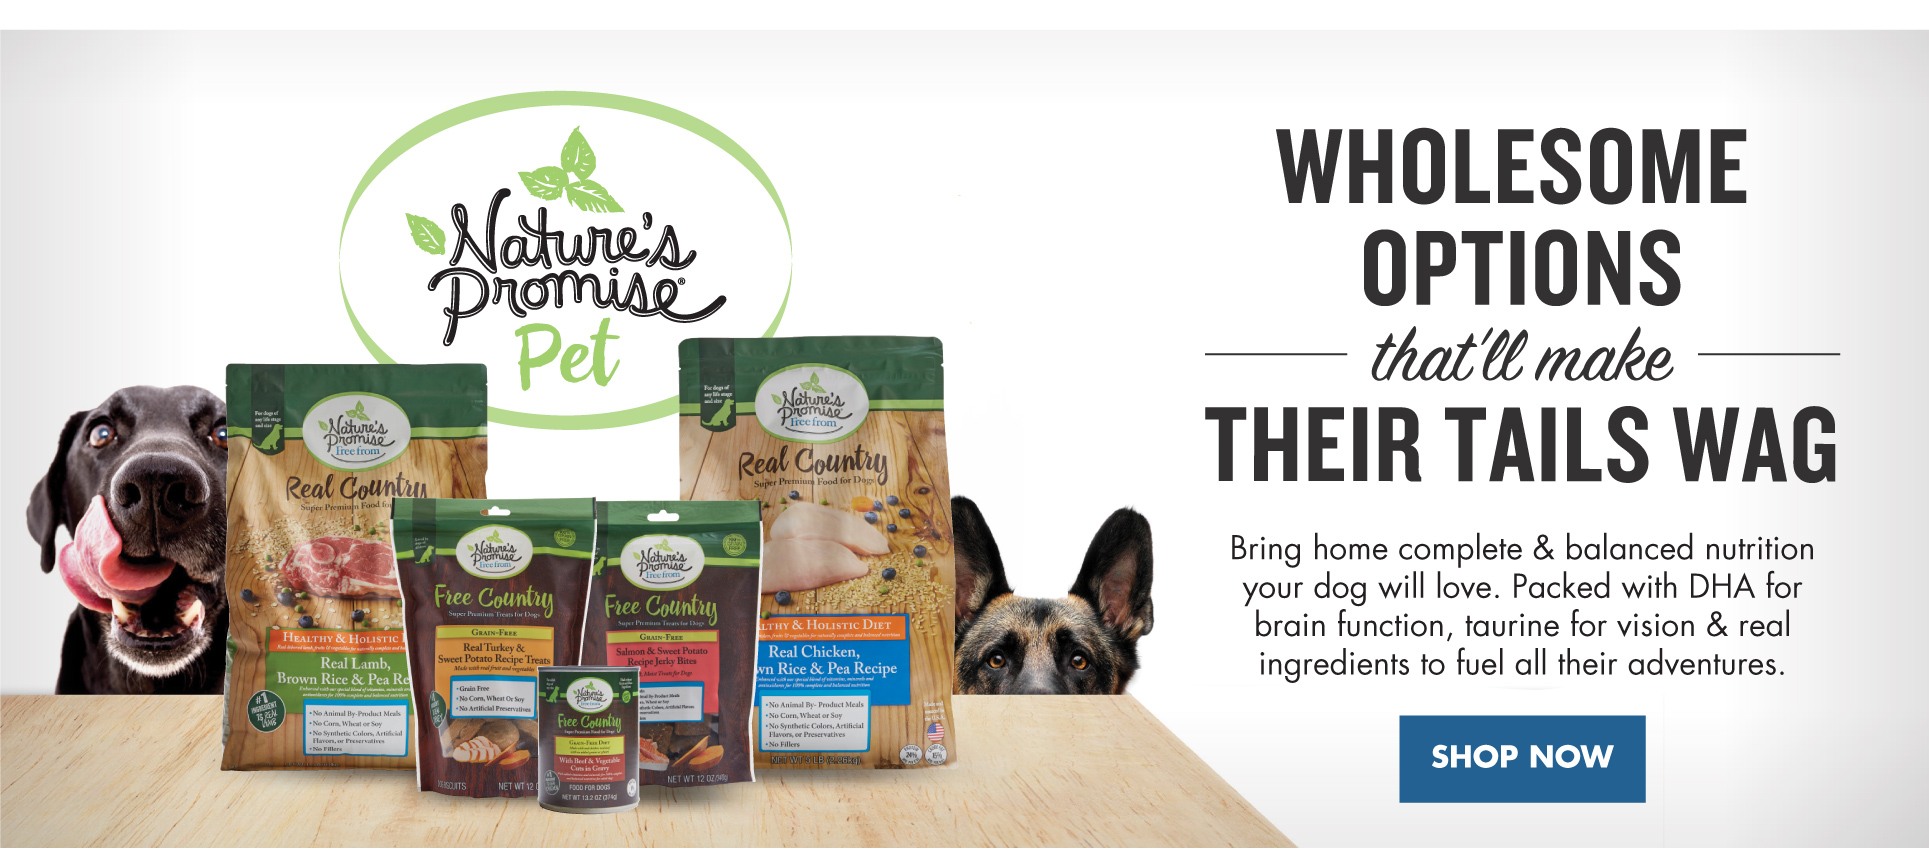 Wholesome options that'll make their tails wag. Bring home complete and balanced nutrition your dog will love. Packed with DHA for brain function, taurine for vision and real ingredients to fuel all their adventures.